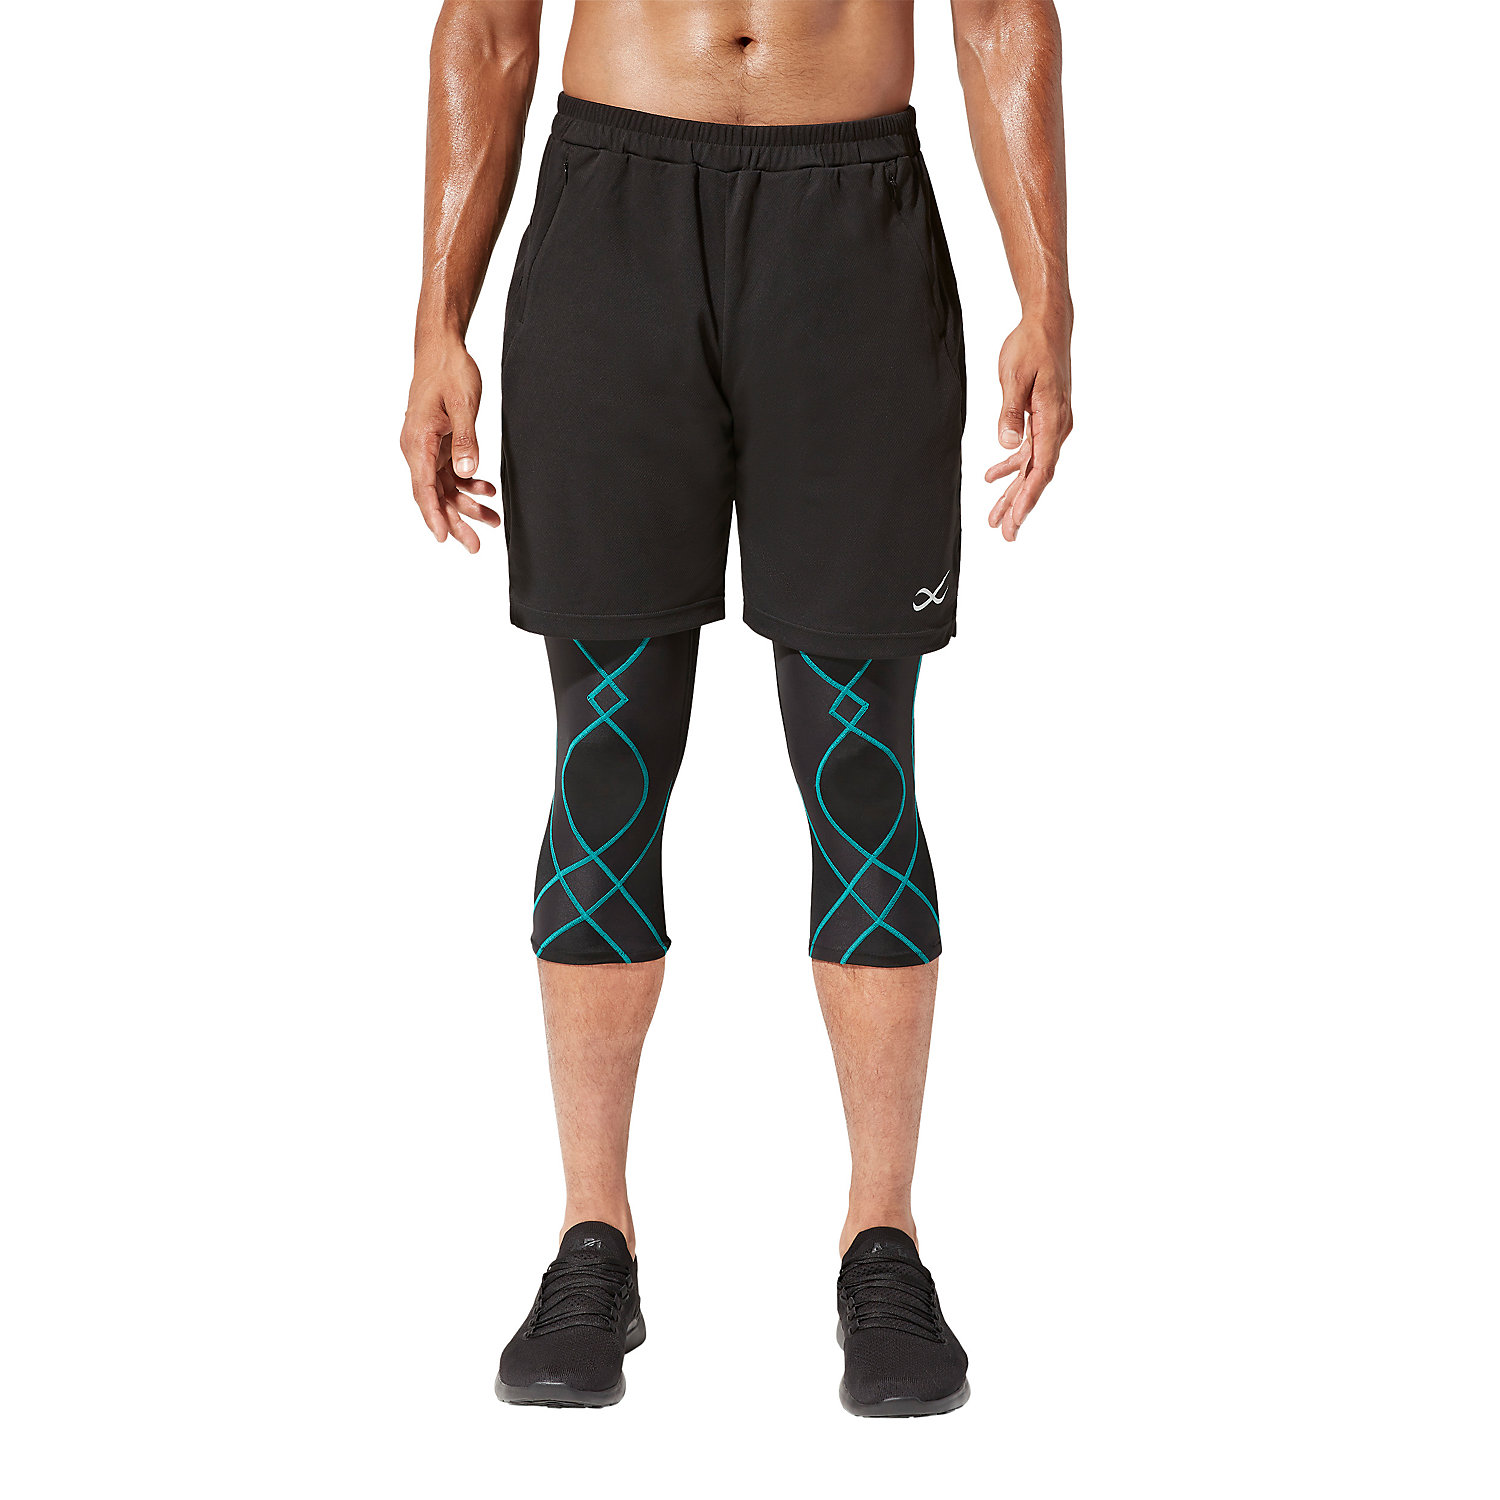 CW-X Mens Stabilyx Joint Support 3/4 Compression Tight